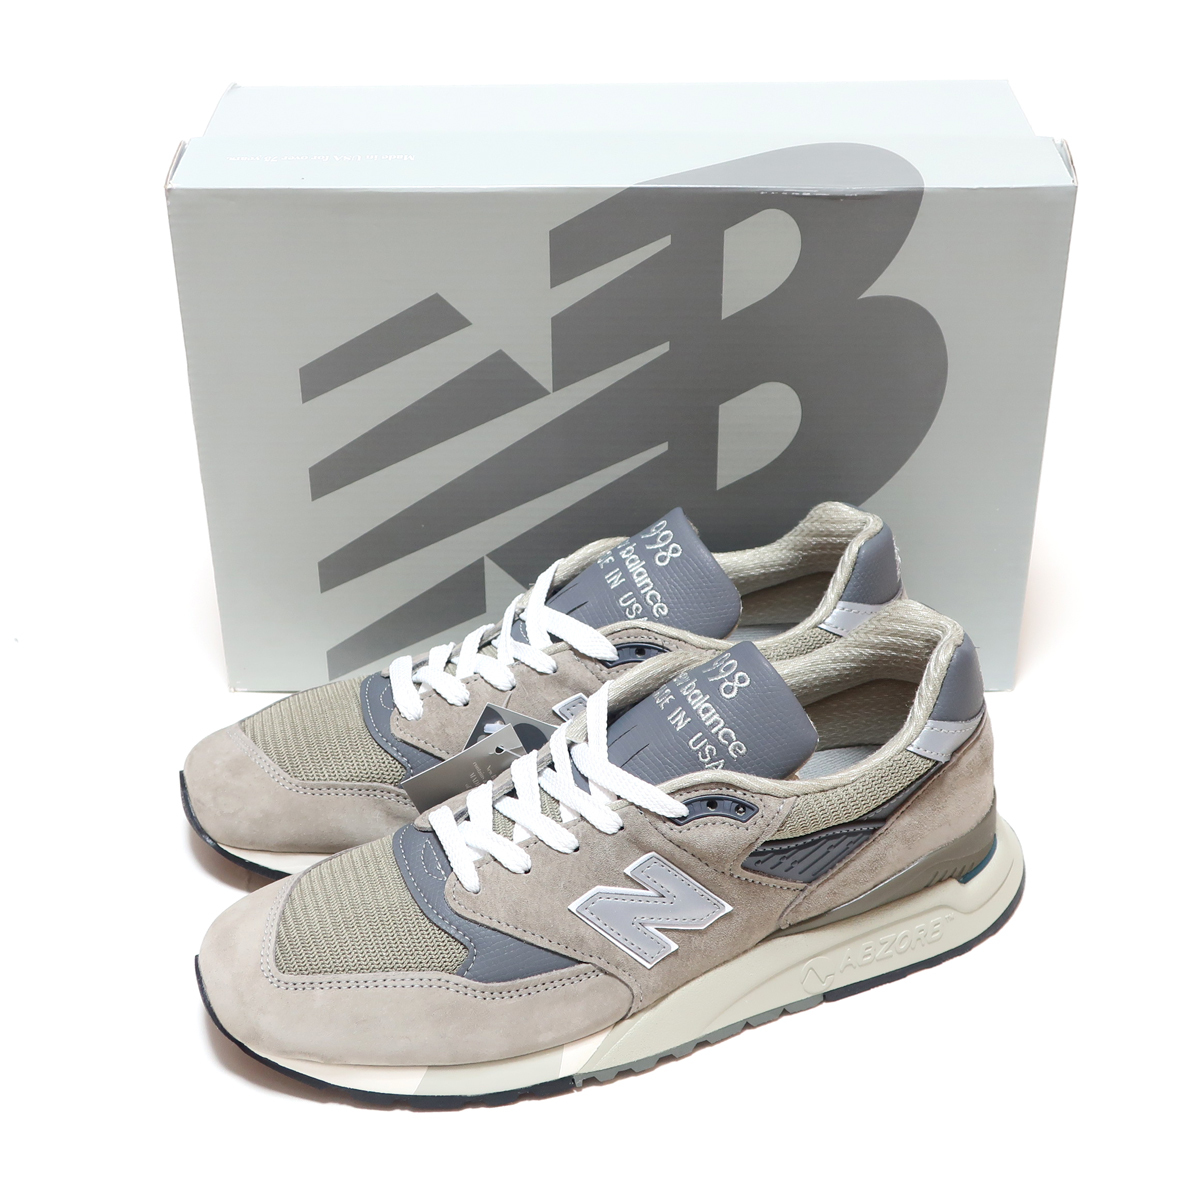 NEW BALANCE U998GR GRAY GREY SUEDE MADE IN USA US10 28cm ( ニューバランス 998 グレー スエード アメリカ製 )